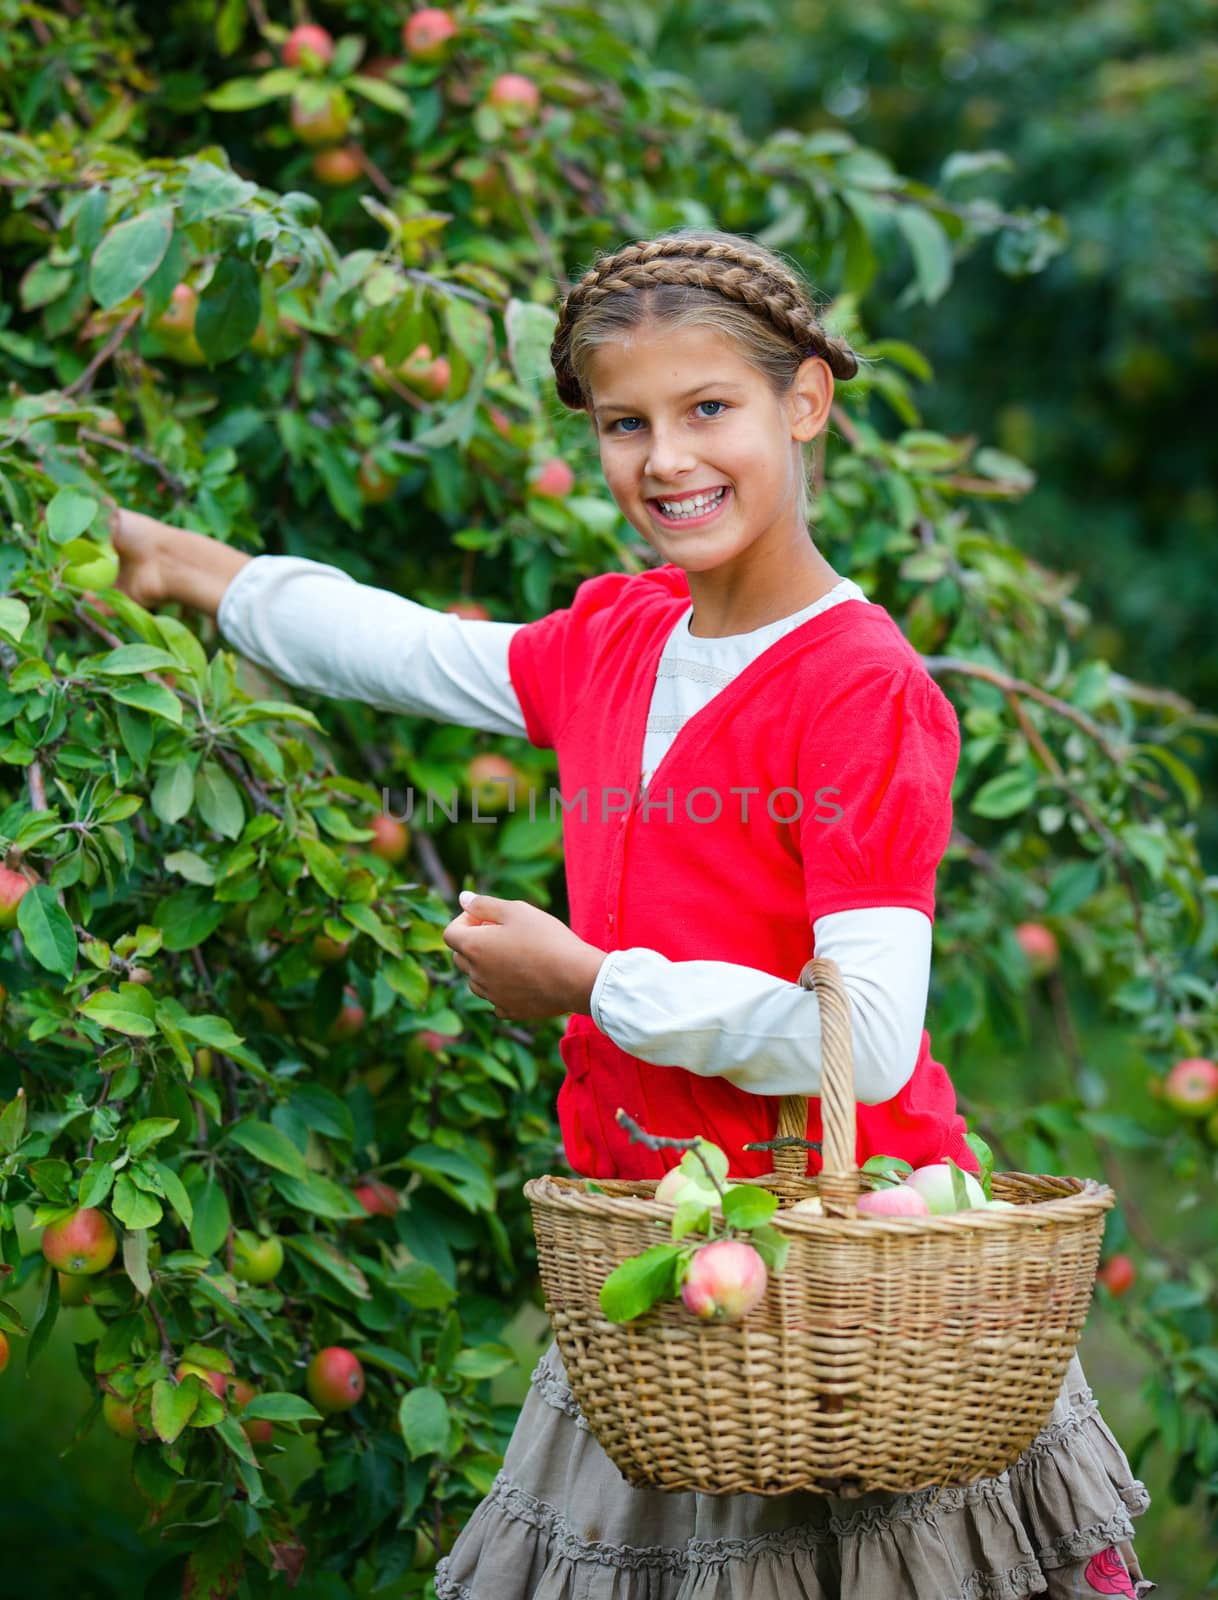 Harvesting apples. Beautiful girl helping in the garden and picking apples in the basket.